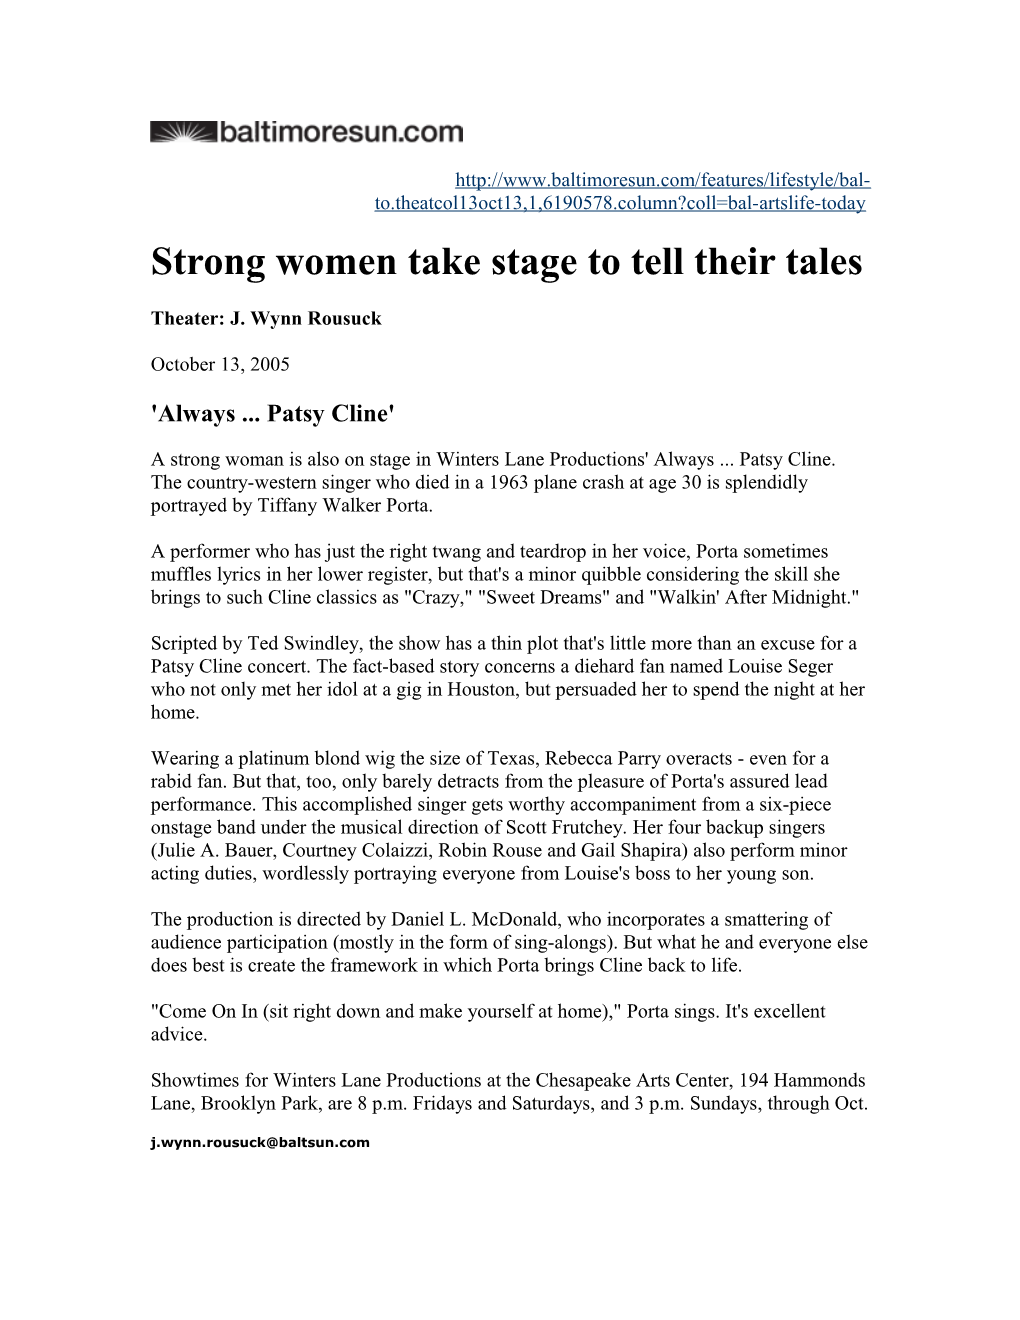 Strong Women Take Stage to Tell Their Tales